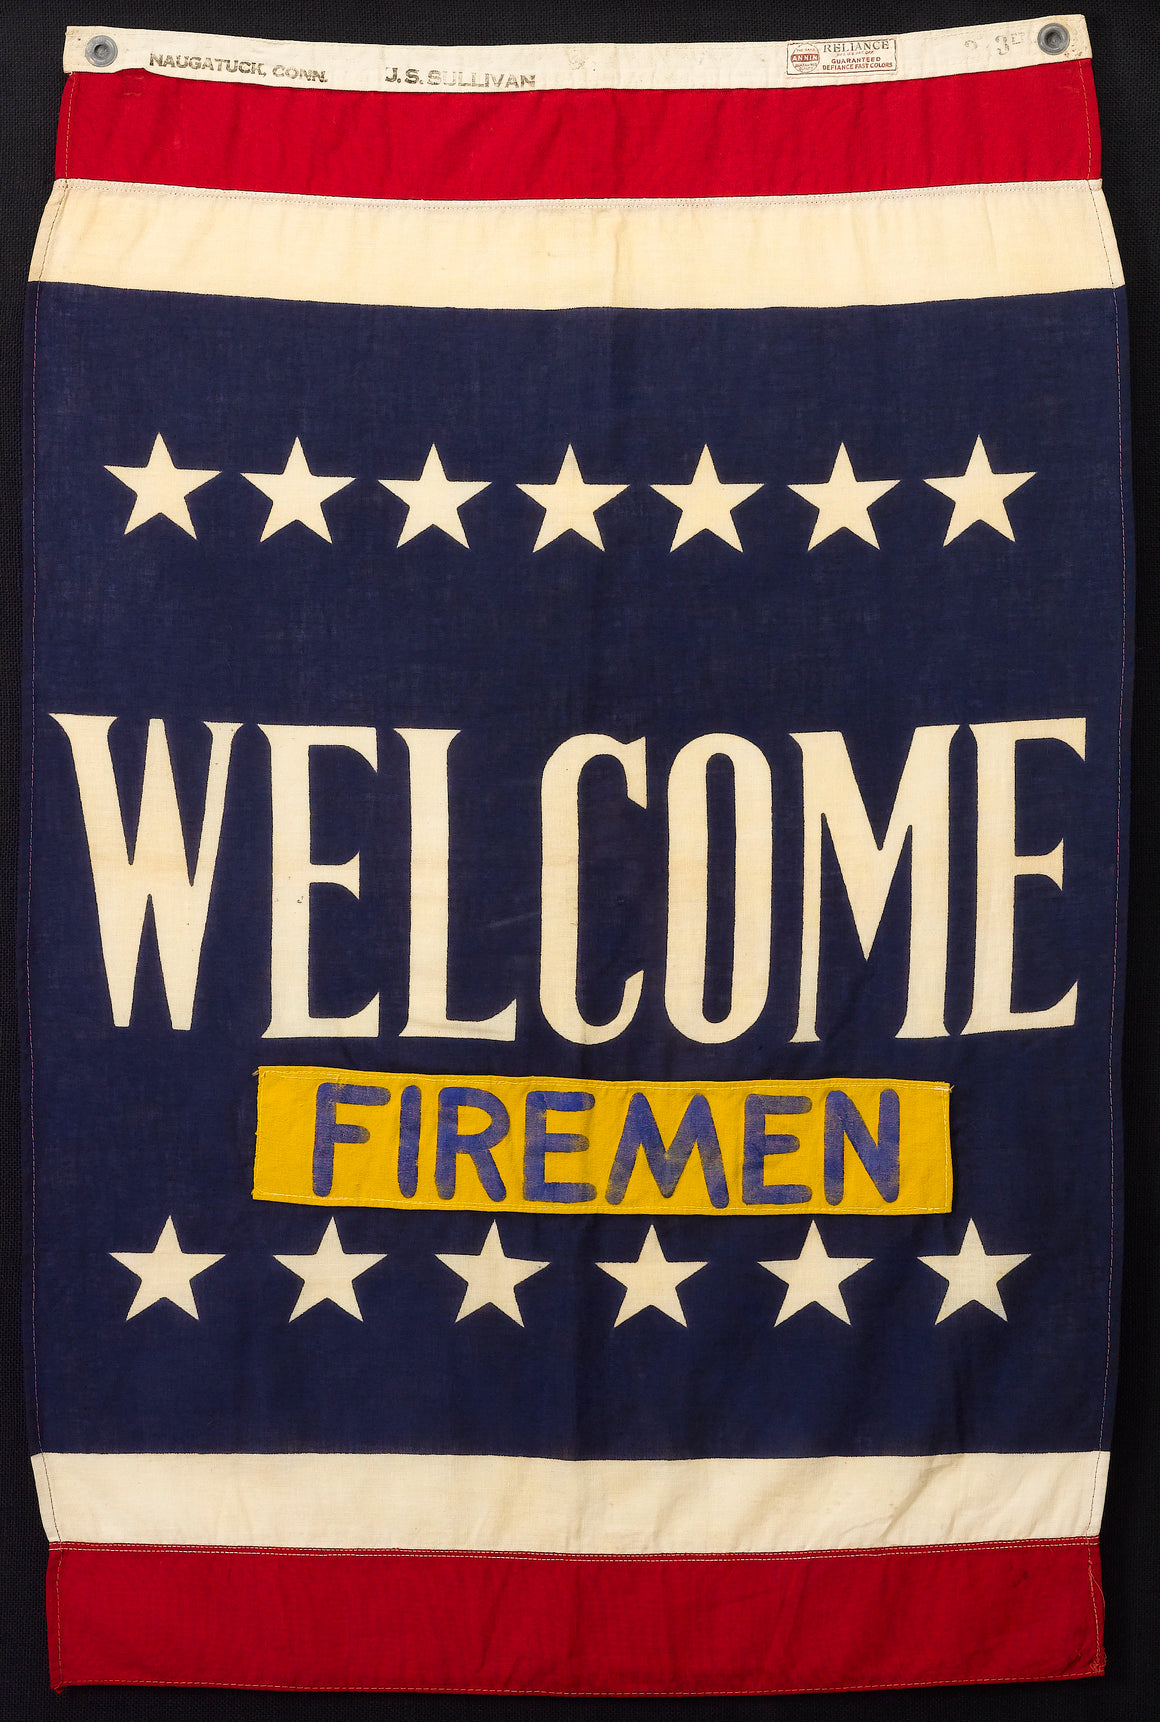 United States Navy WWII "Welcome Firemen" 13-Star Patriotic Banner - The Great Republic